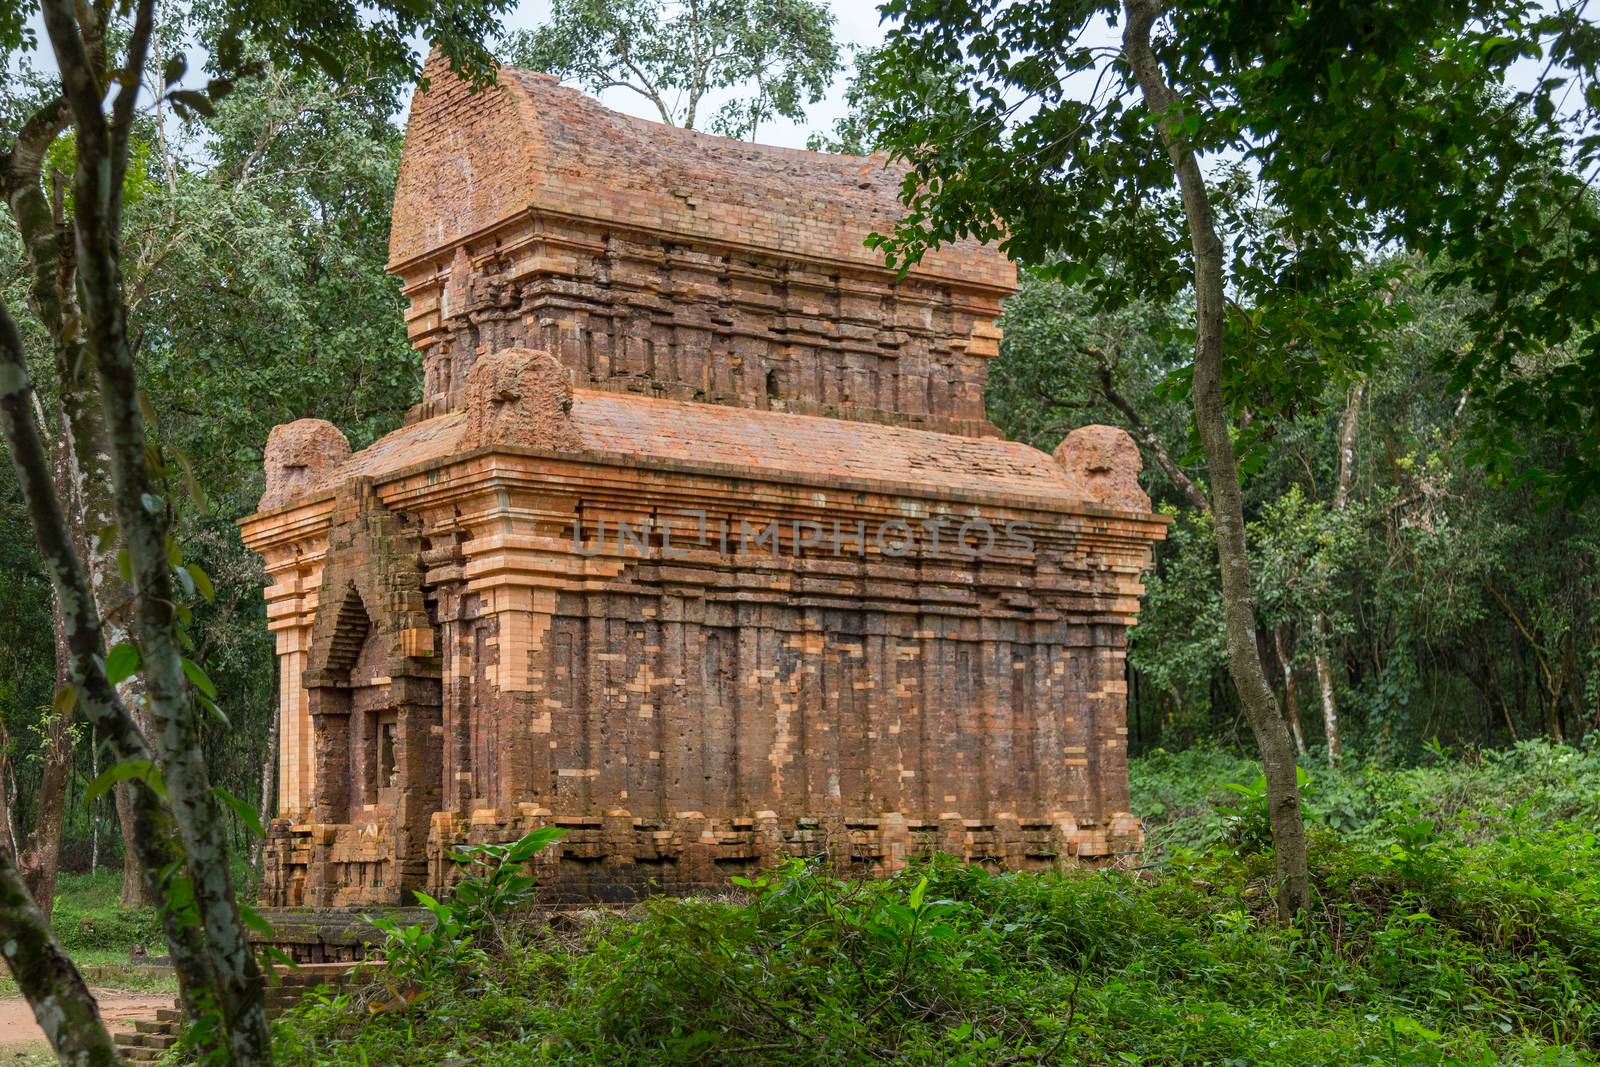 My Son, partially ruined Hindu temples in Quang Nam province, central Vietnam by kgboxford